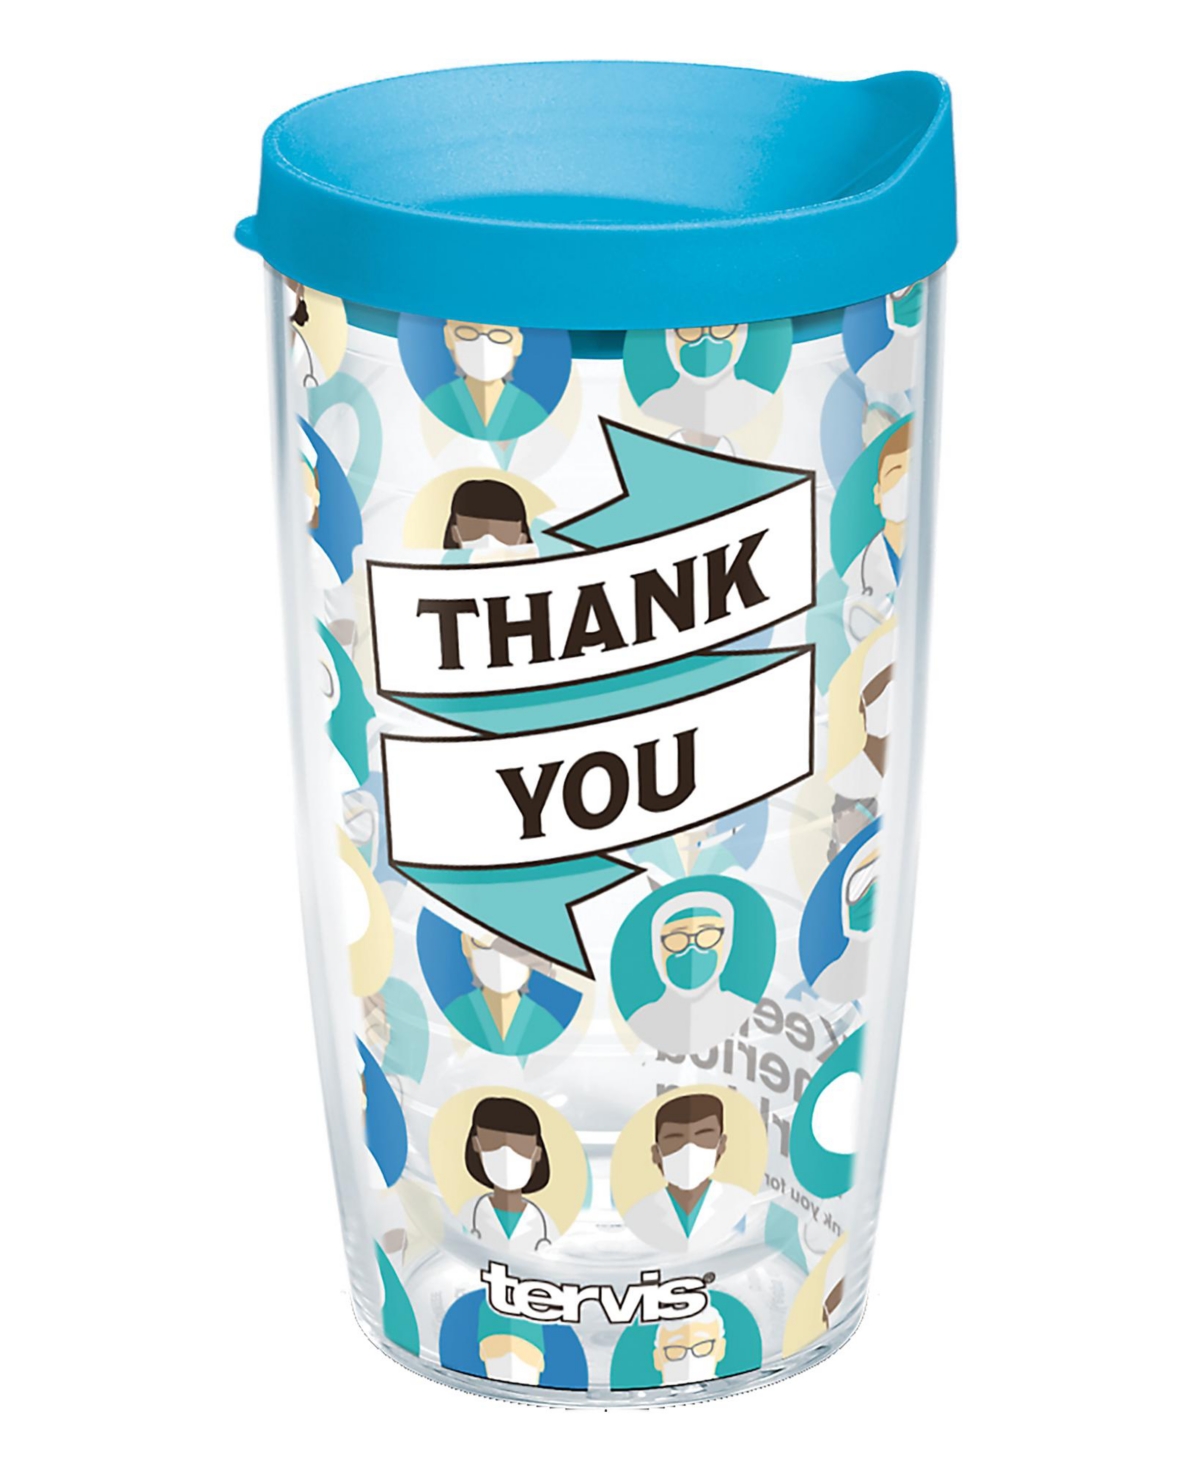 Tervis Tumbler Tervis Healthcare Salute Made In Usa Double Walled Insulated Tumbler Travel Cup Keeps Drinks Cold & In Open Miscellaneous